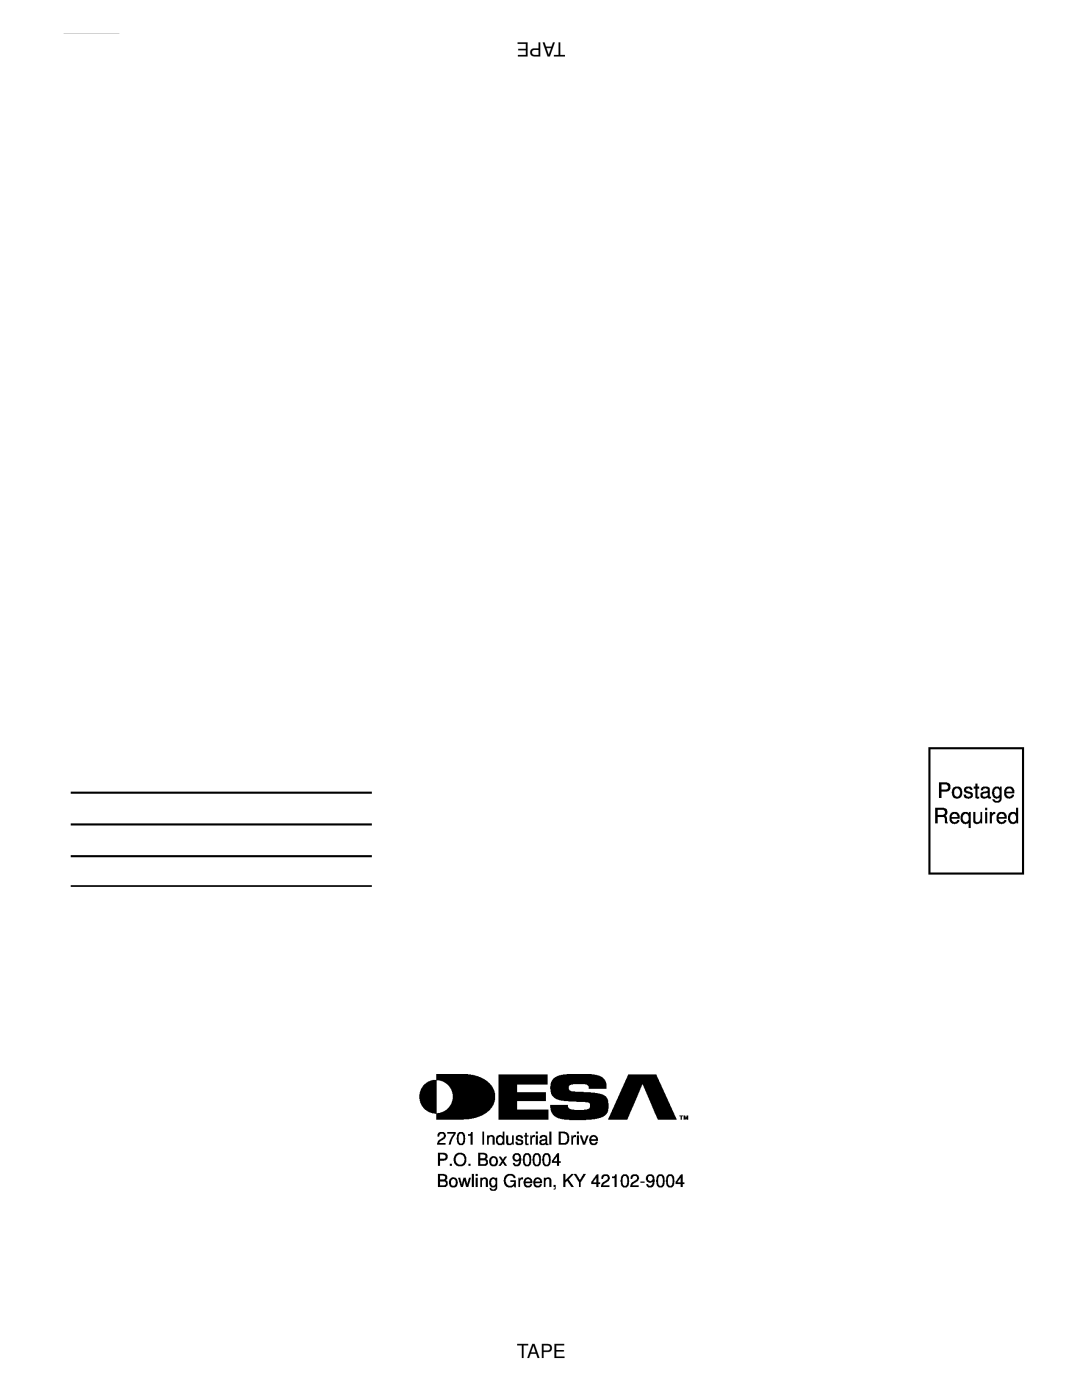 Desa SBVBN(C), SBVBP(C) installation manual Tape, Postage Required, Industrial Drive P.O. Box Bowling Green, KY 